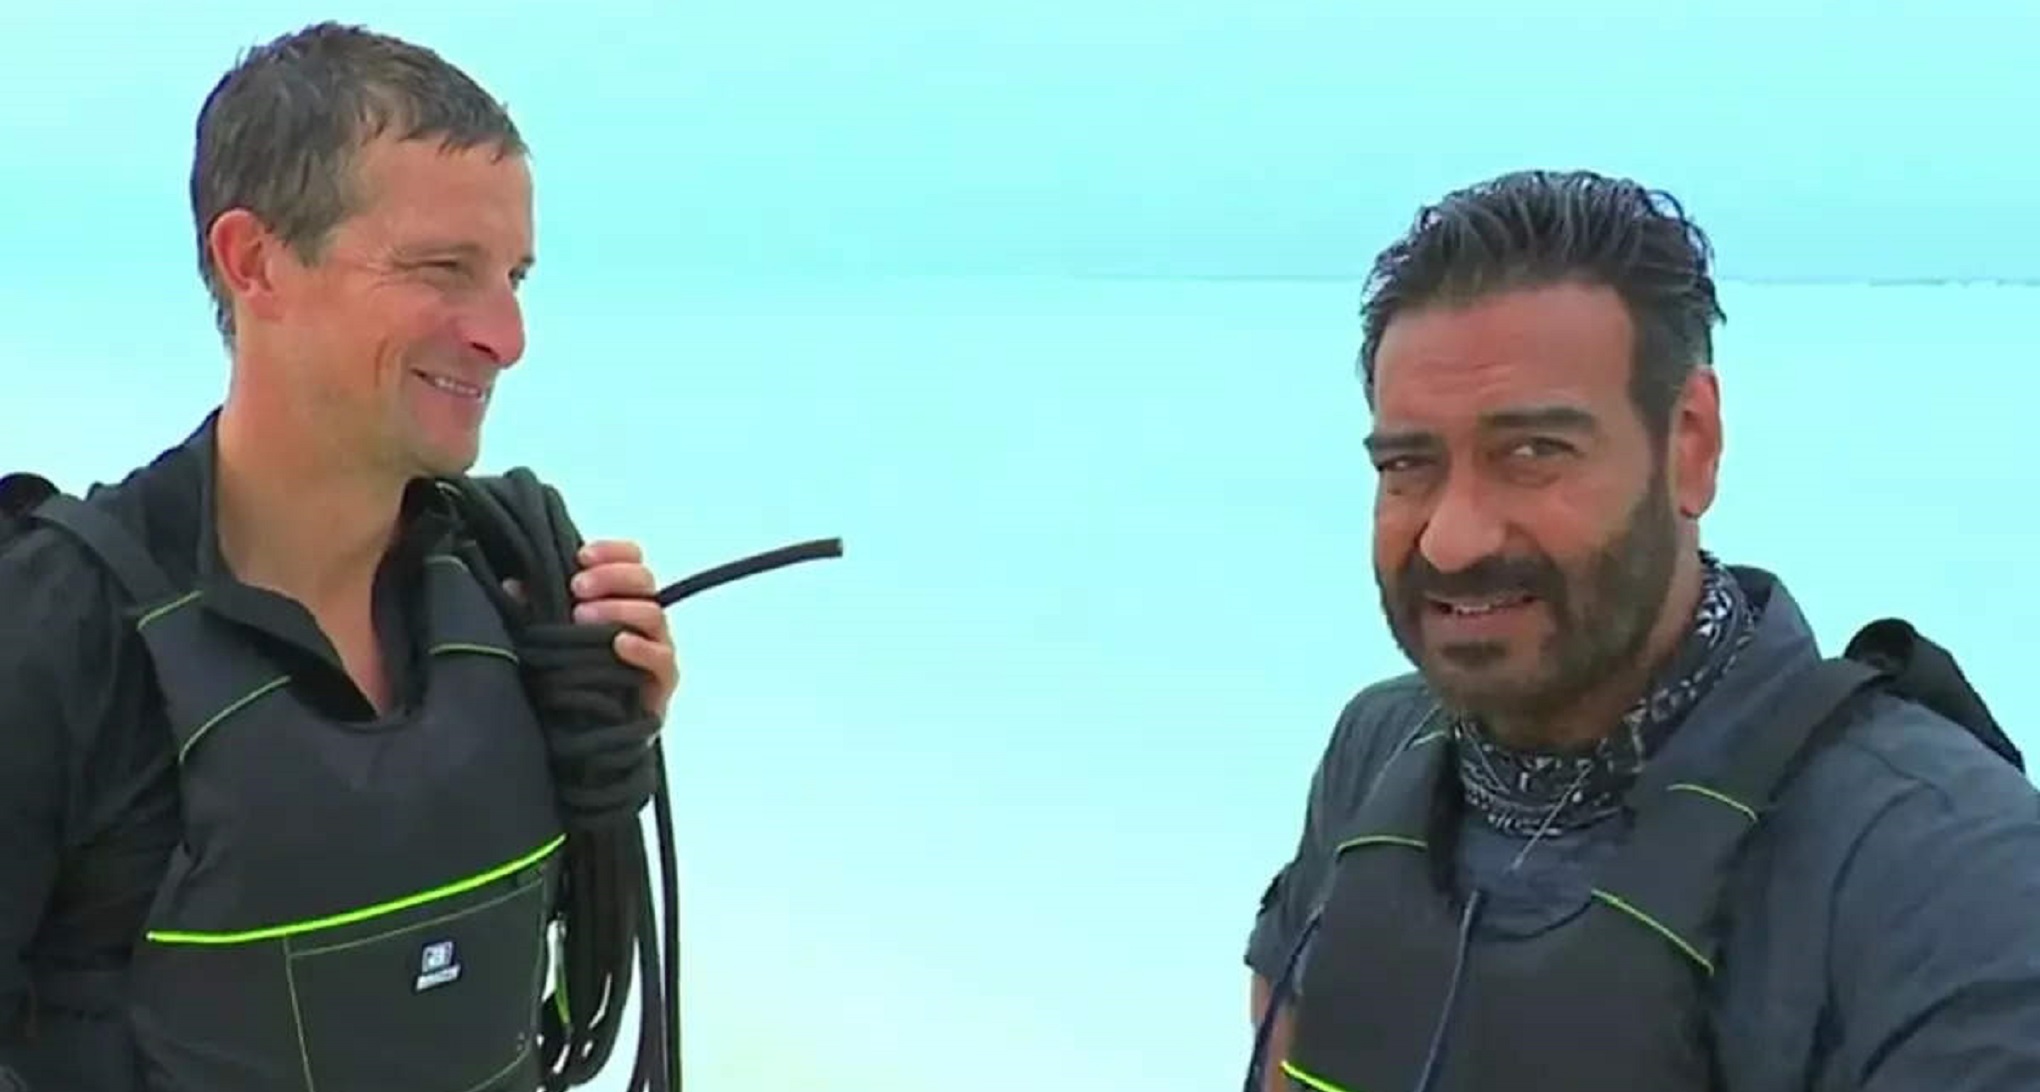 Ajay Devgn Tests His Surviving Skills With Bear Grills In New ‘Into the Wild’ Episode On Discovery+